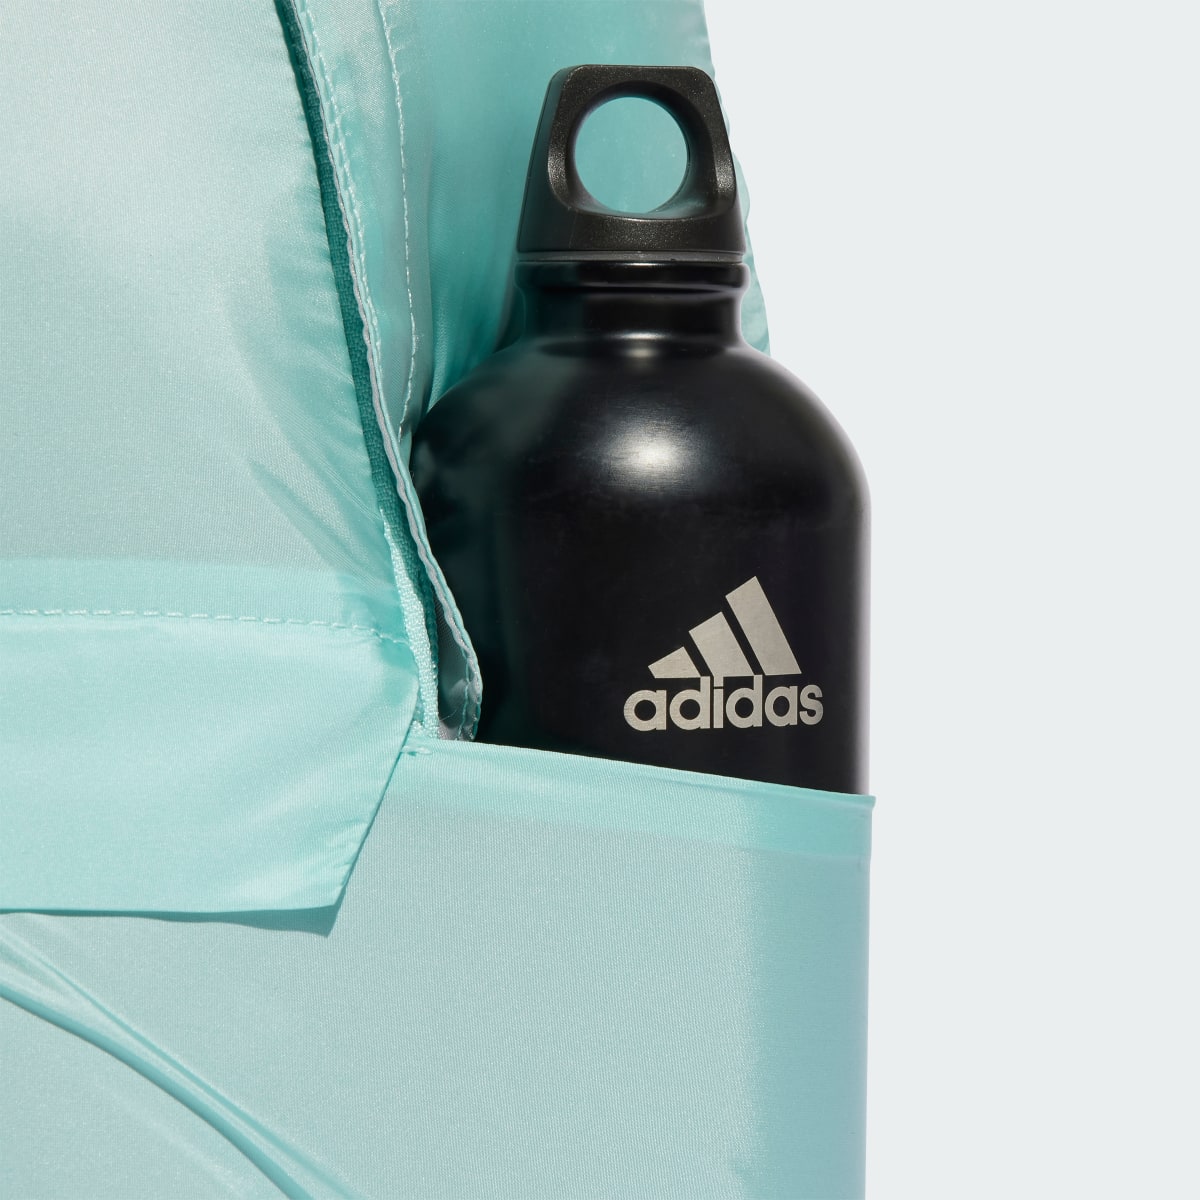 Adidas Classic Gen Z Backpack. 4